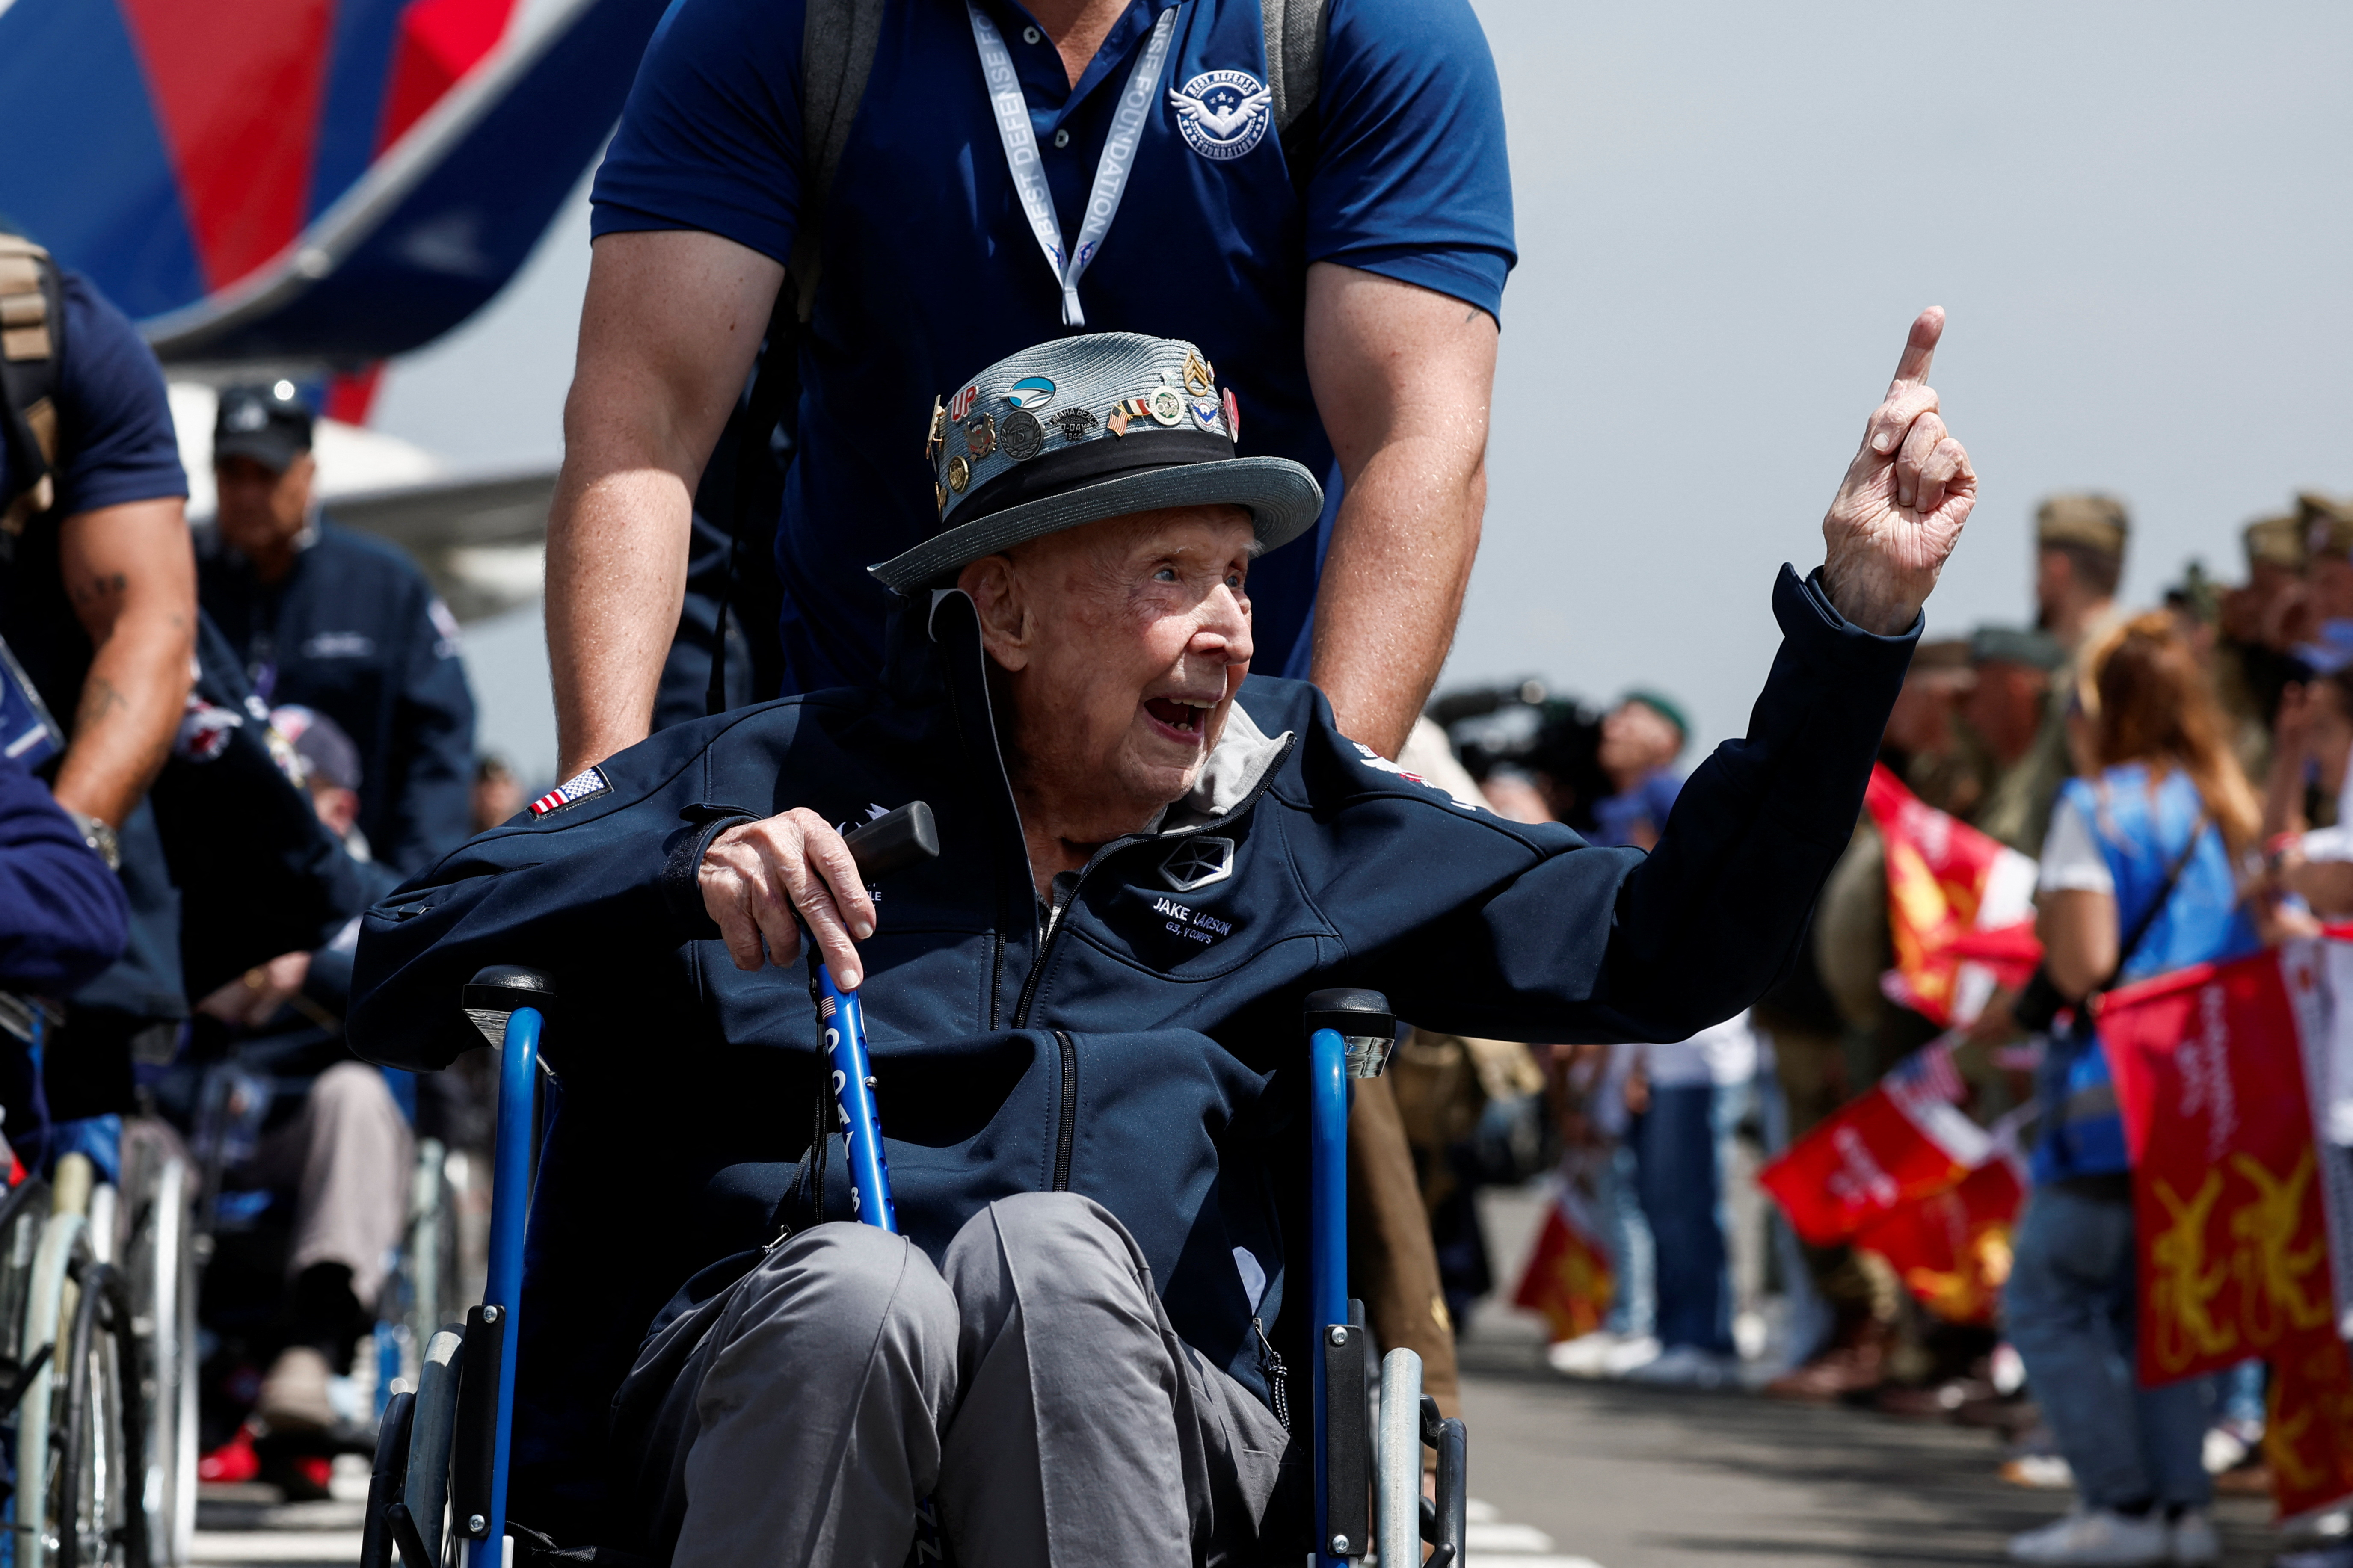 World War II Veterans arrive in Normandy, France to commemorate D-Day